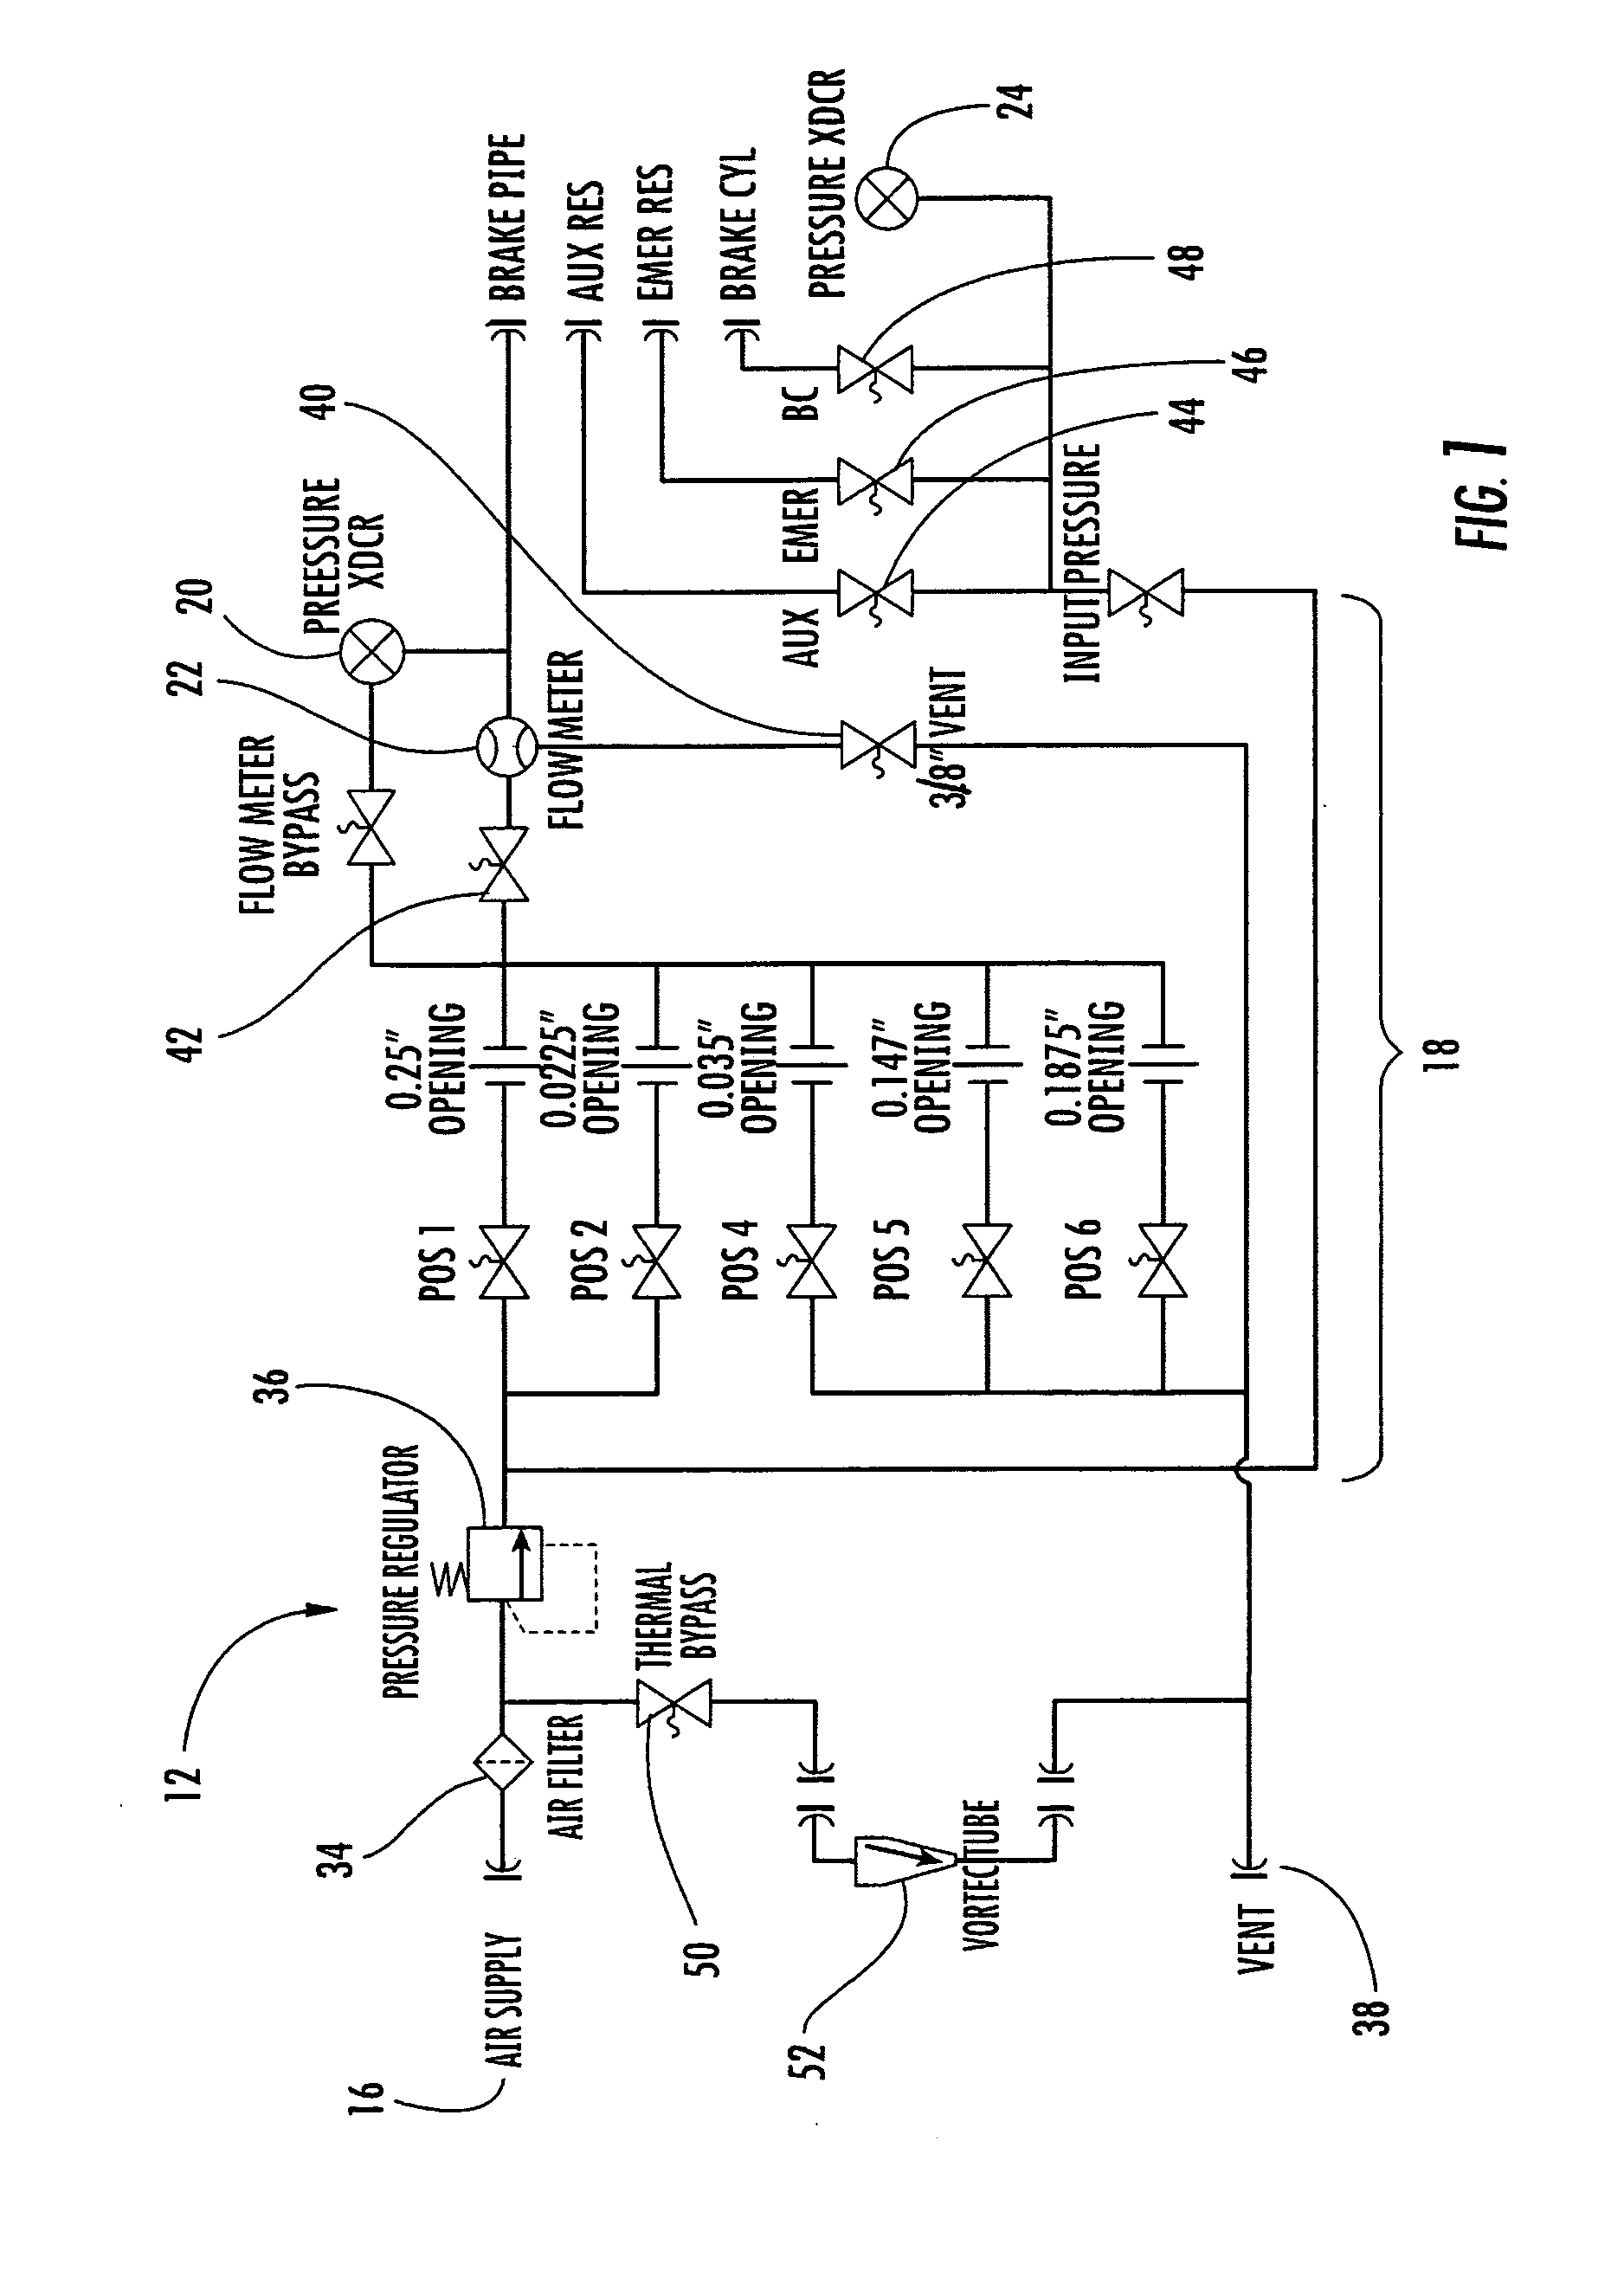 Test device and method for testing a rail car brake system